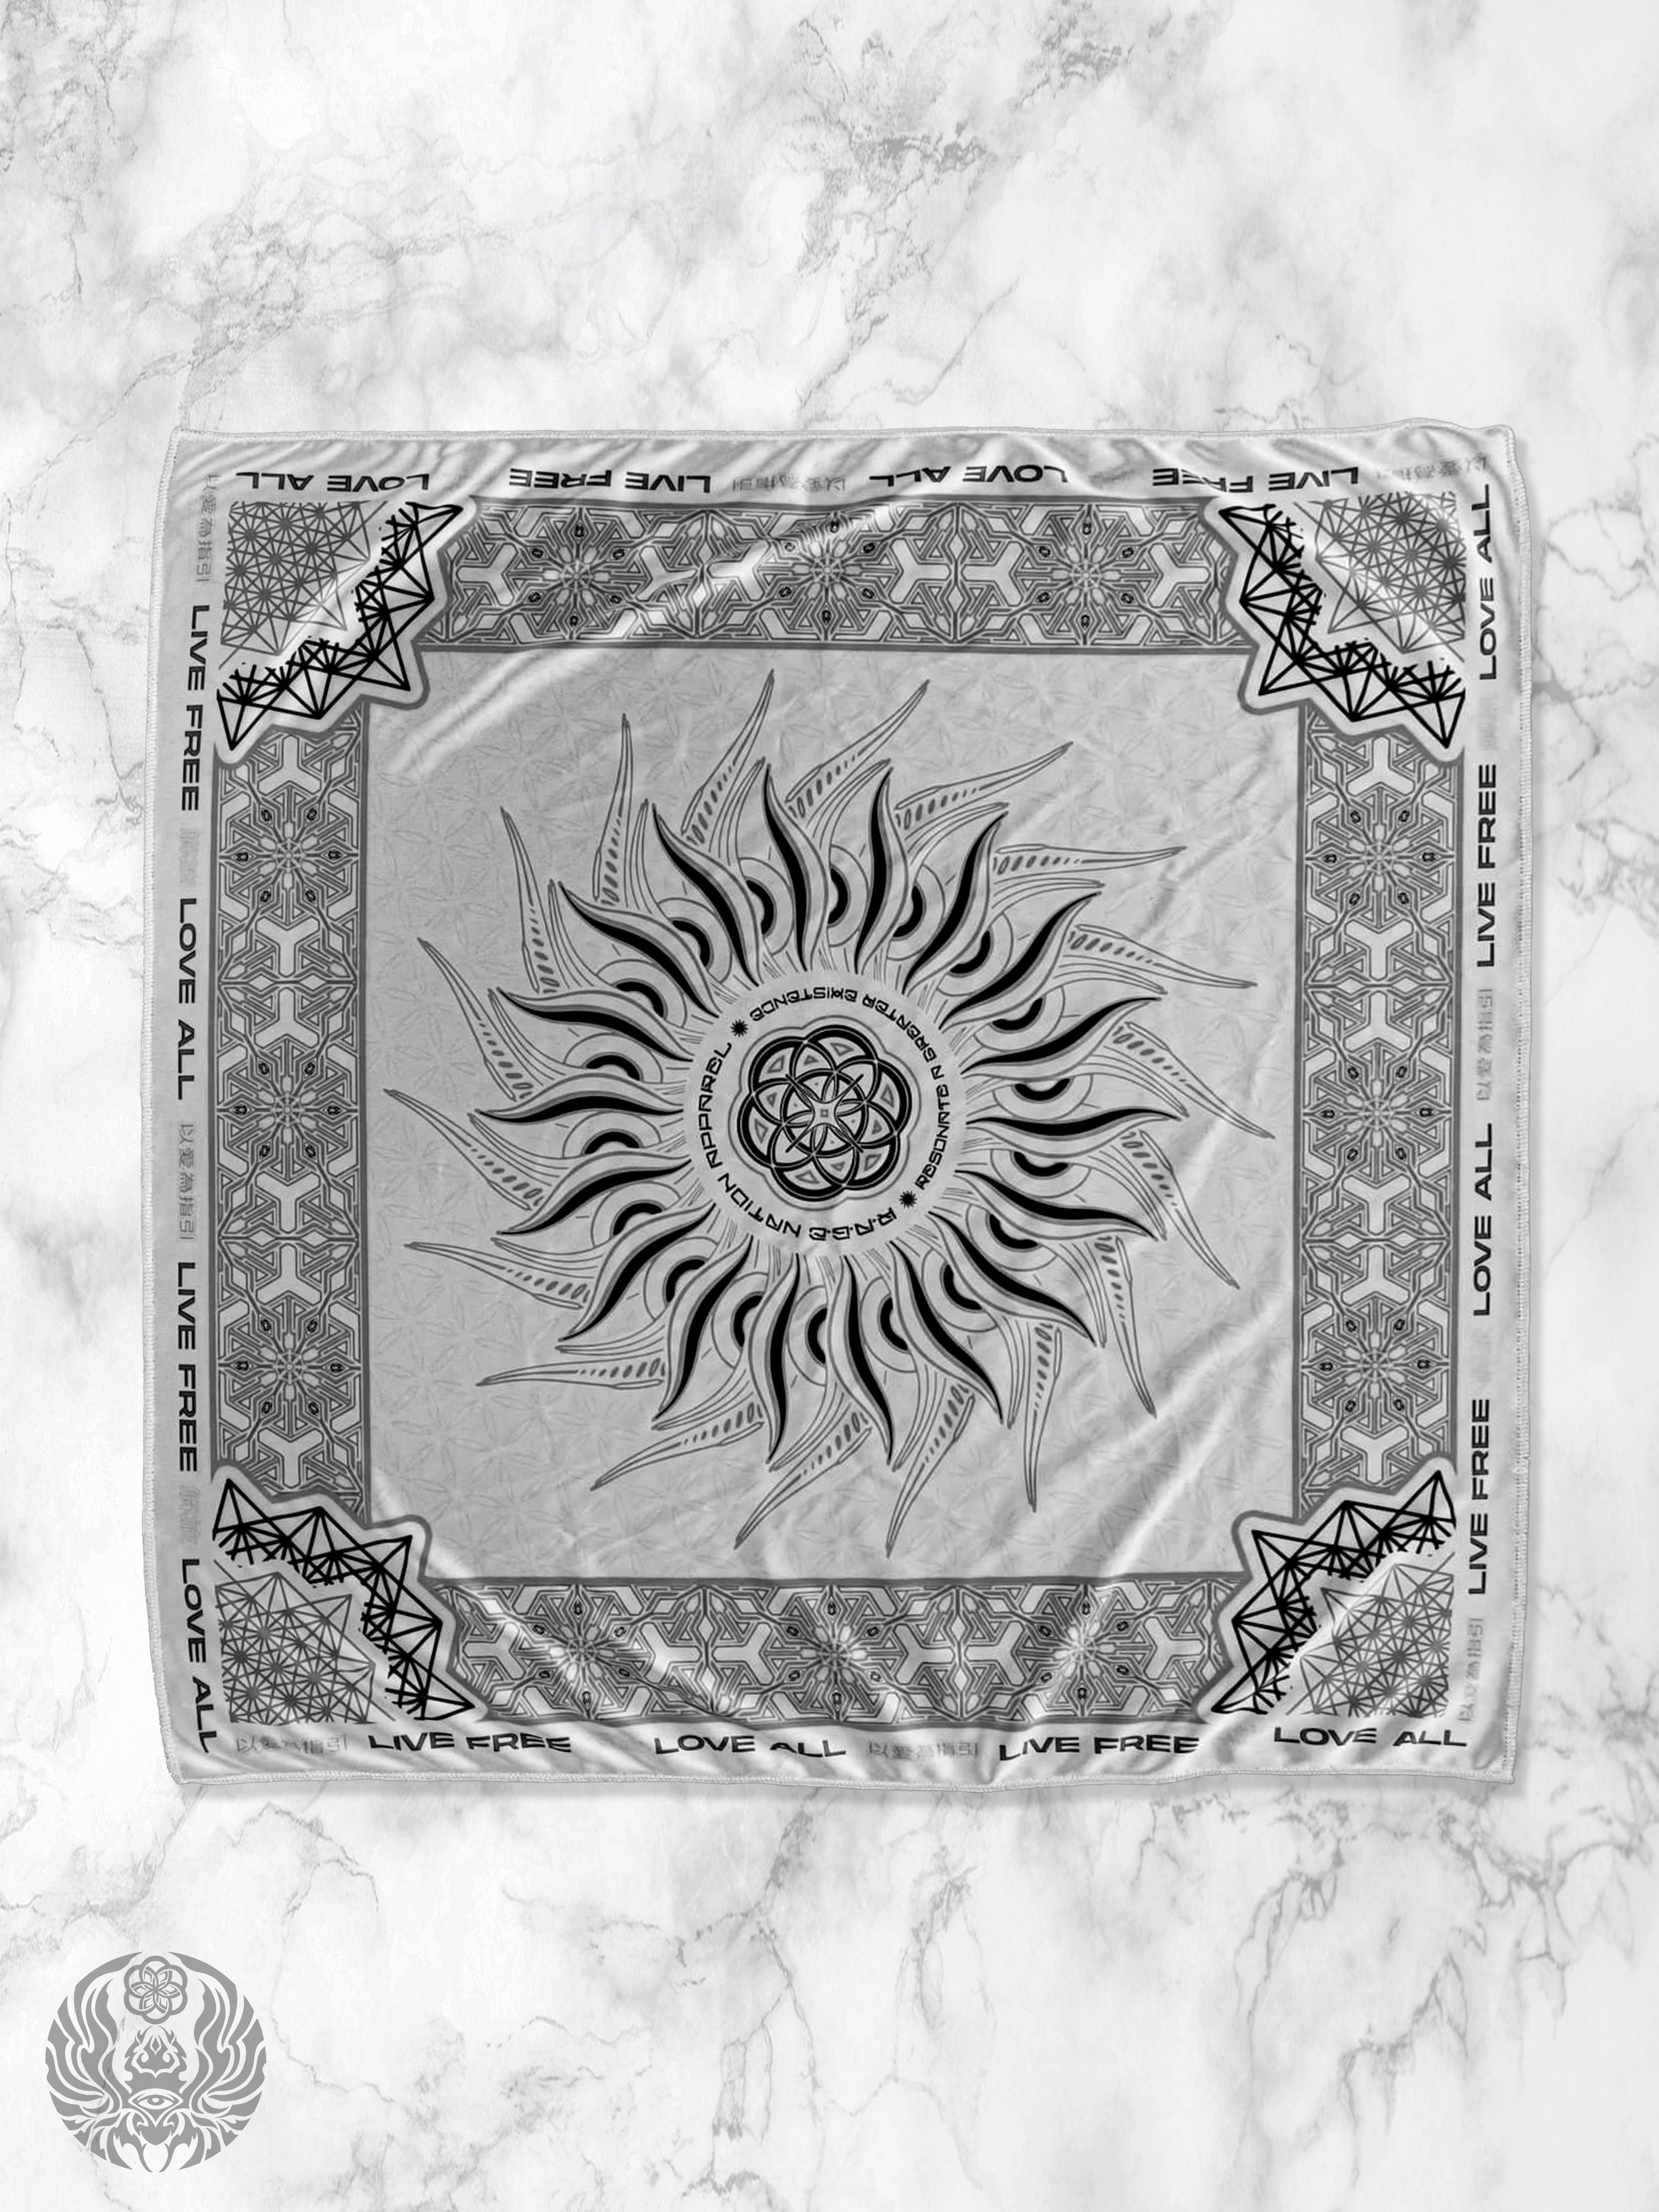 PROTECTED BY INTENT ✦ Frost White Double-sided Bandana